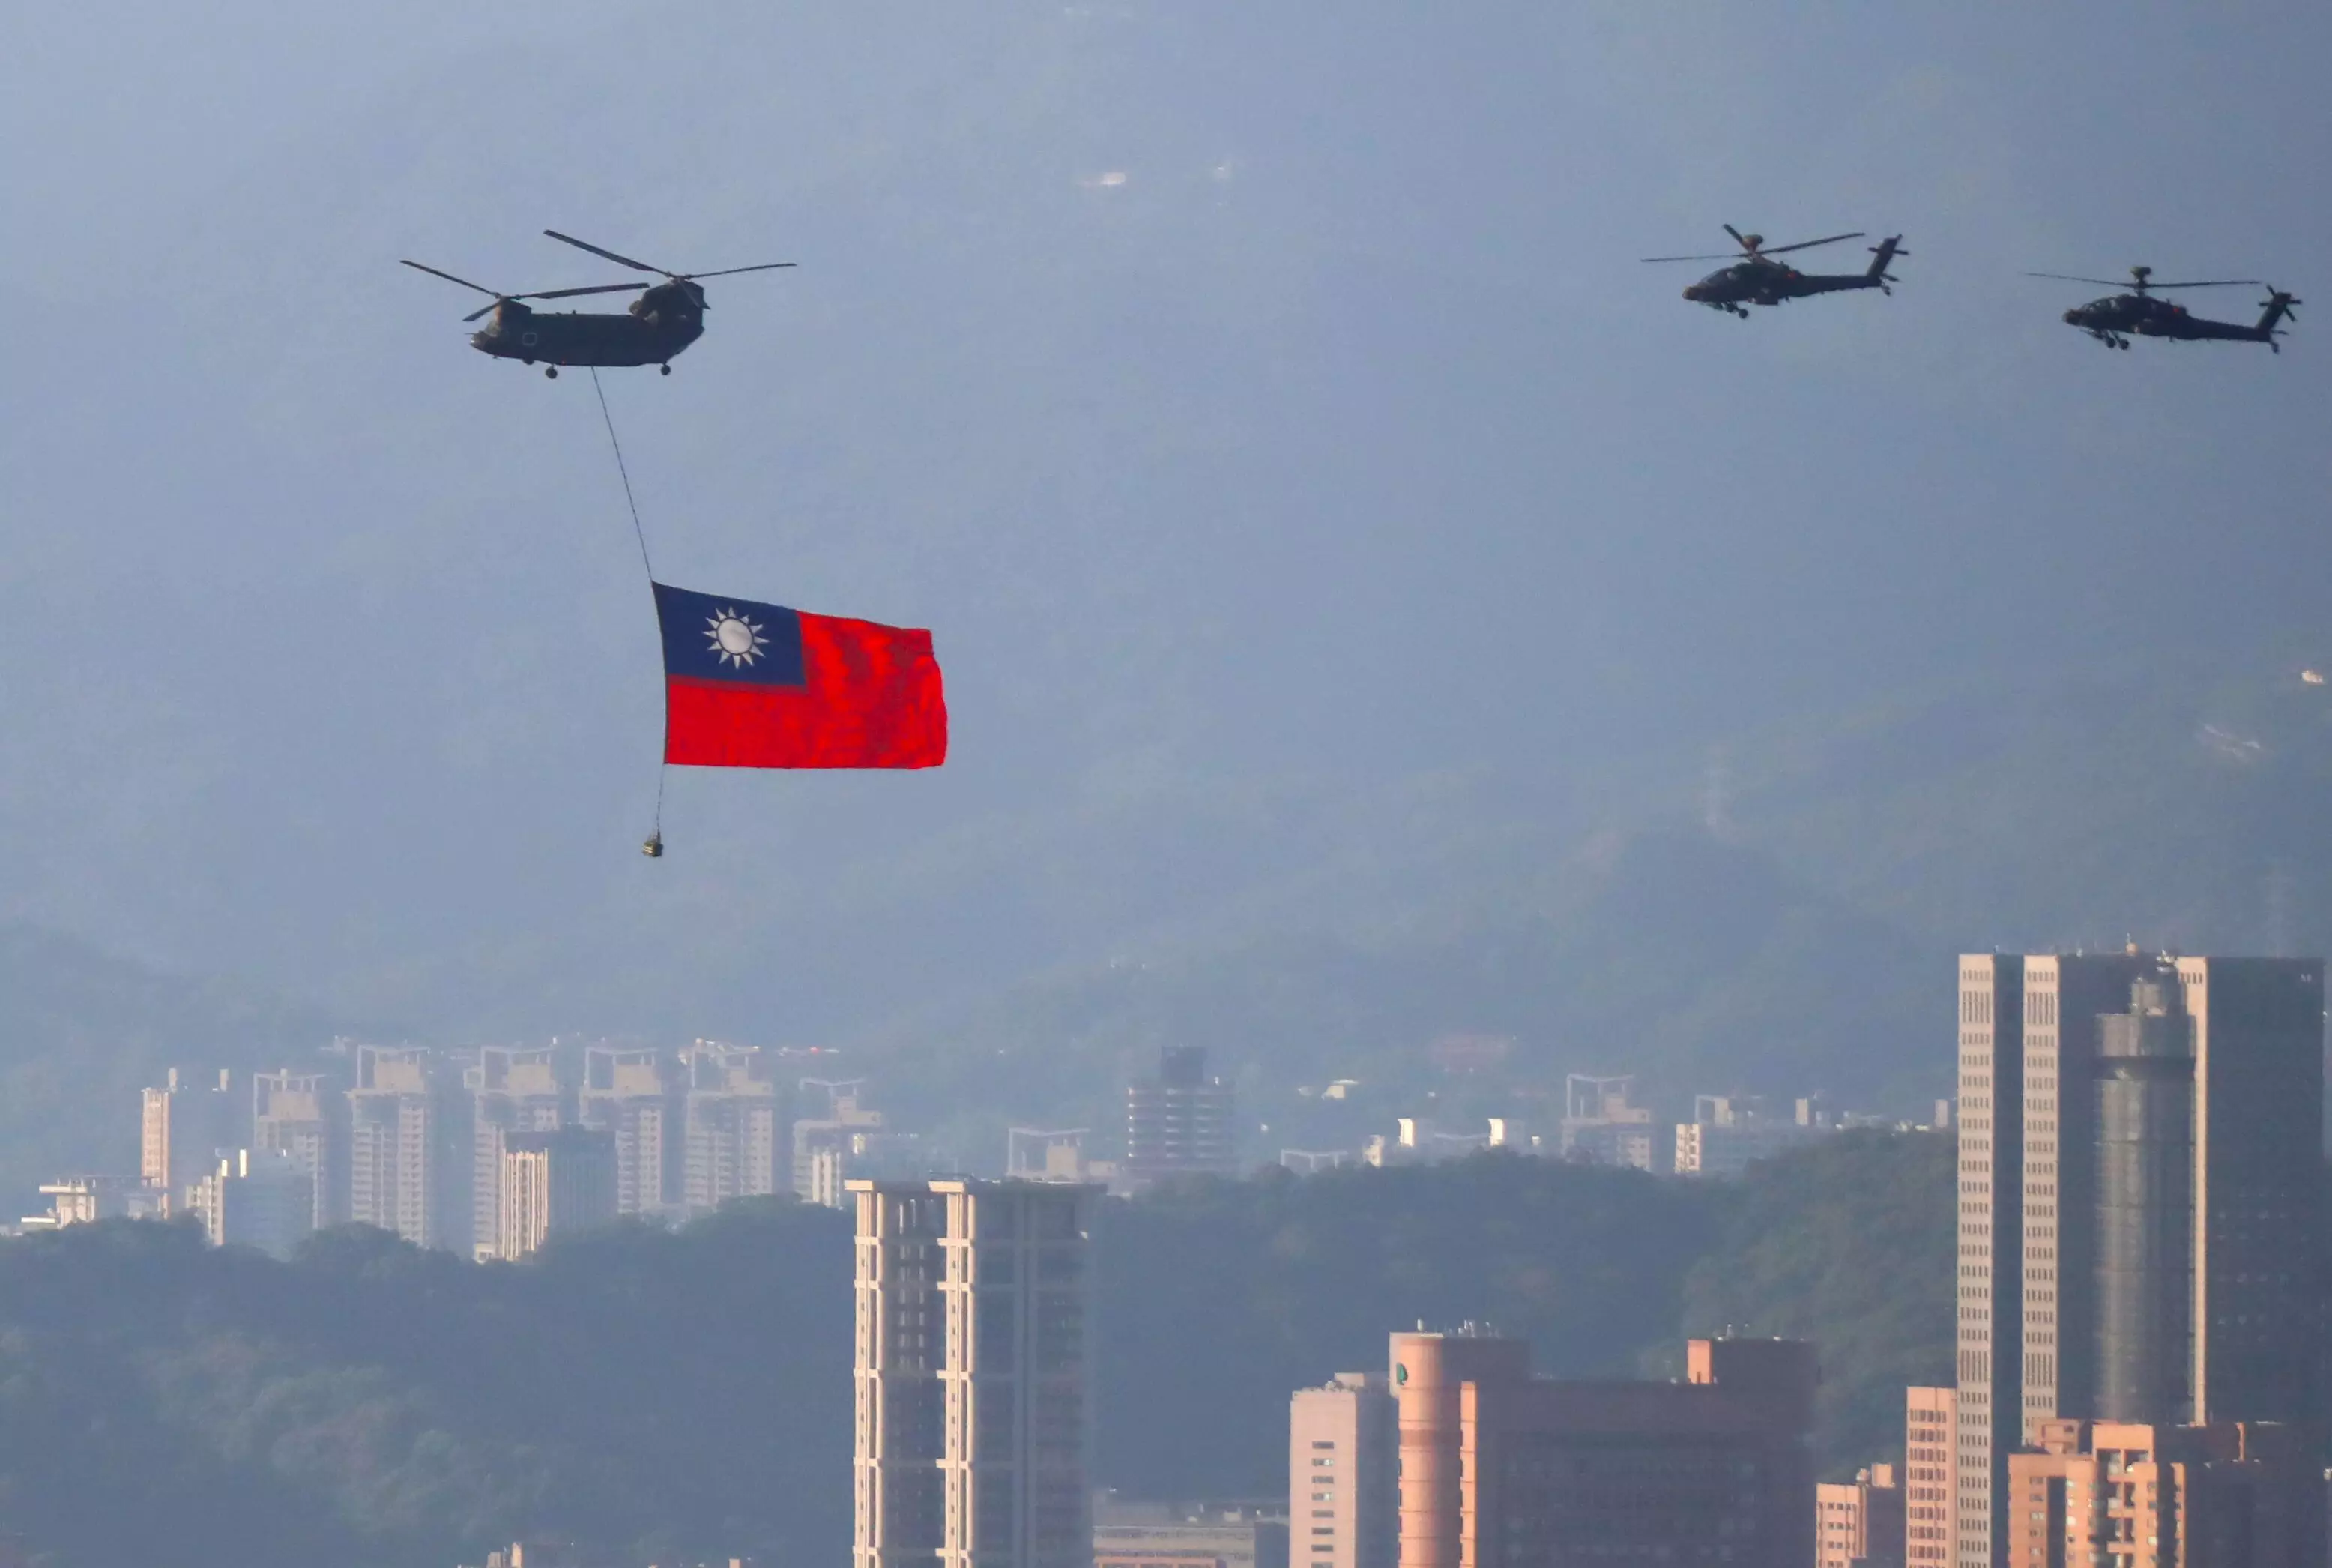 A military helicopter carrying a Taiwan flag conducts a flyby rehearsal ahead of the Double-tenth national day celebration.